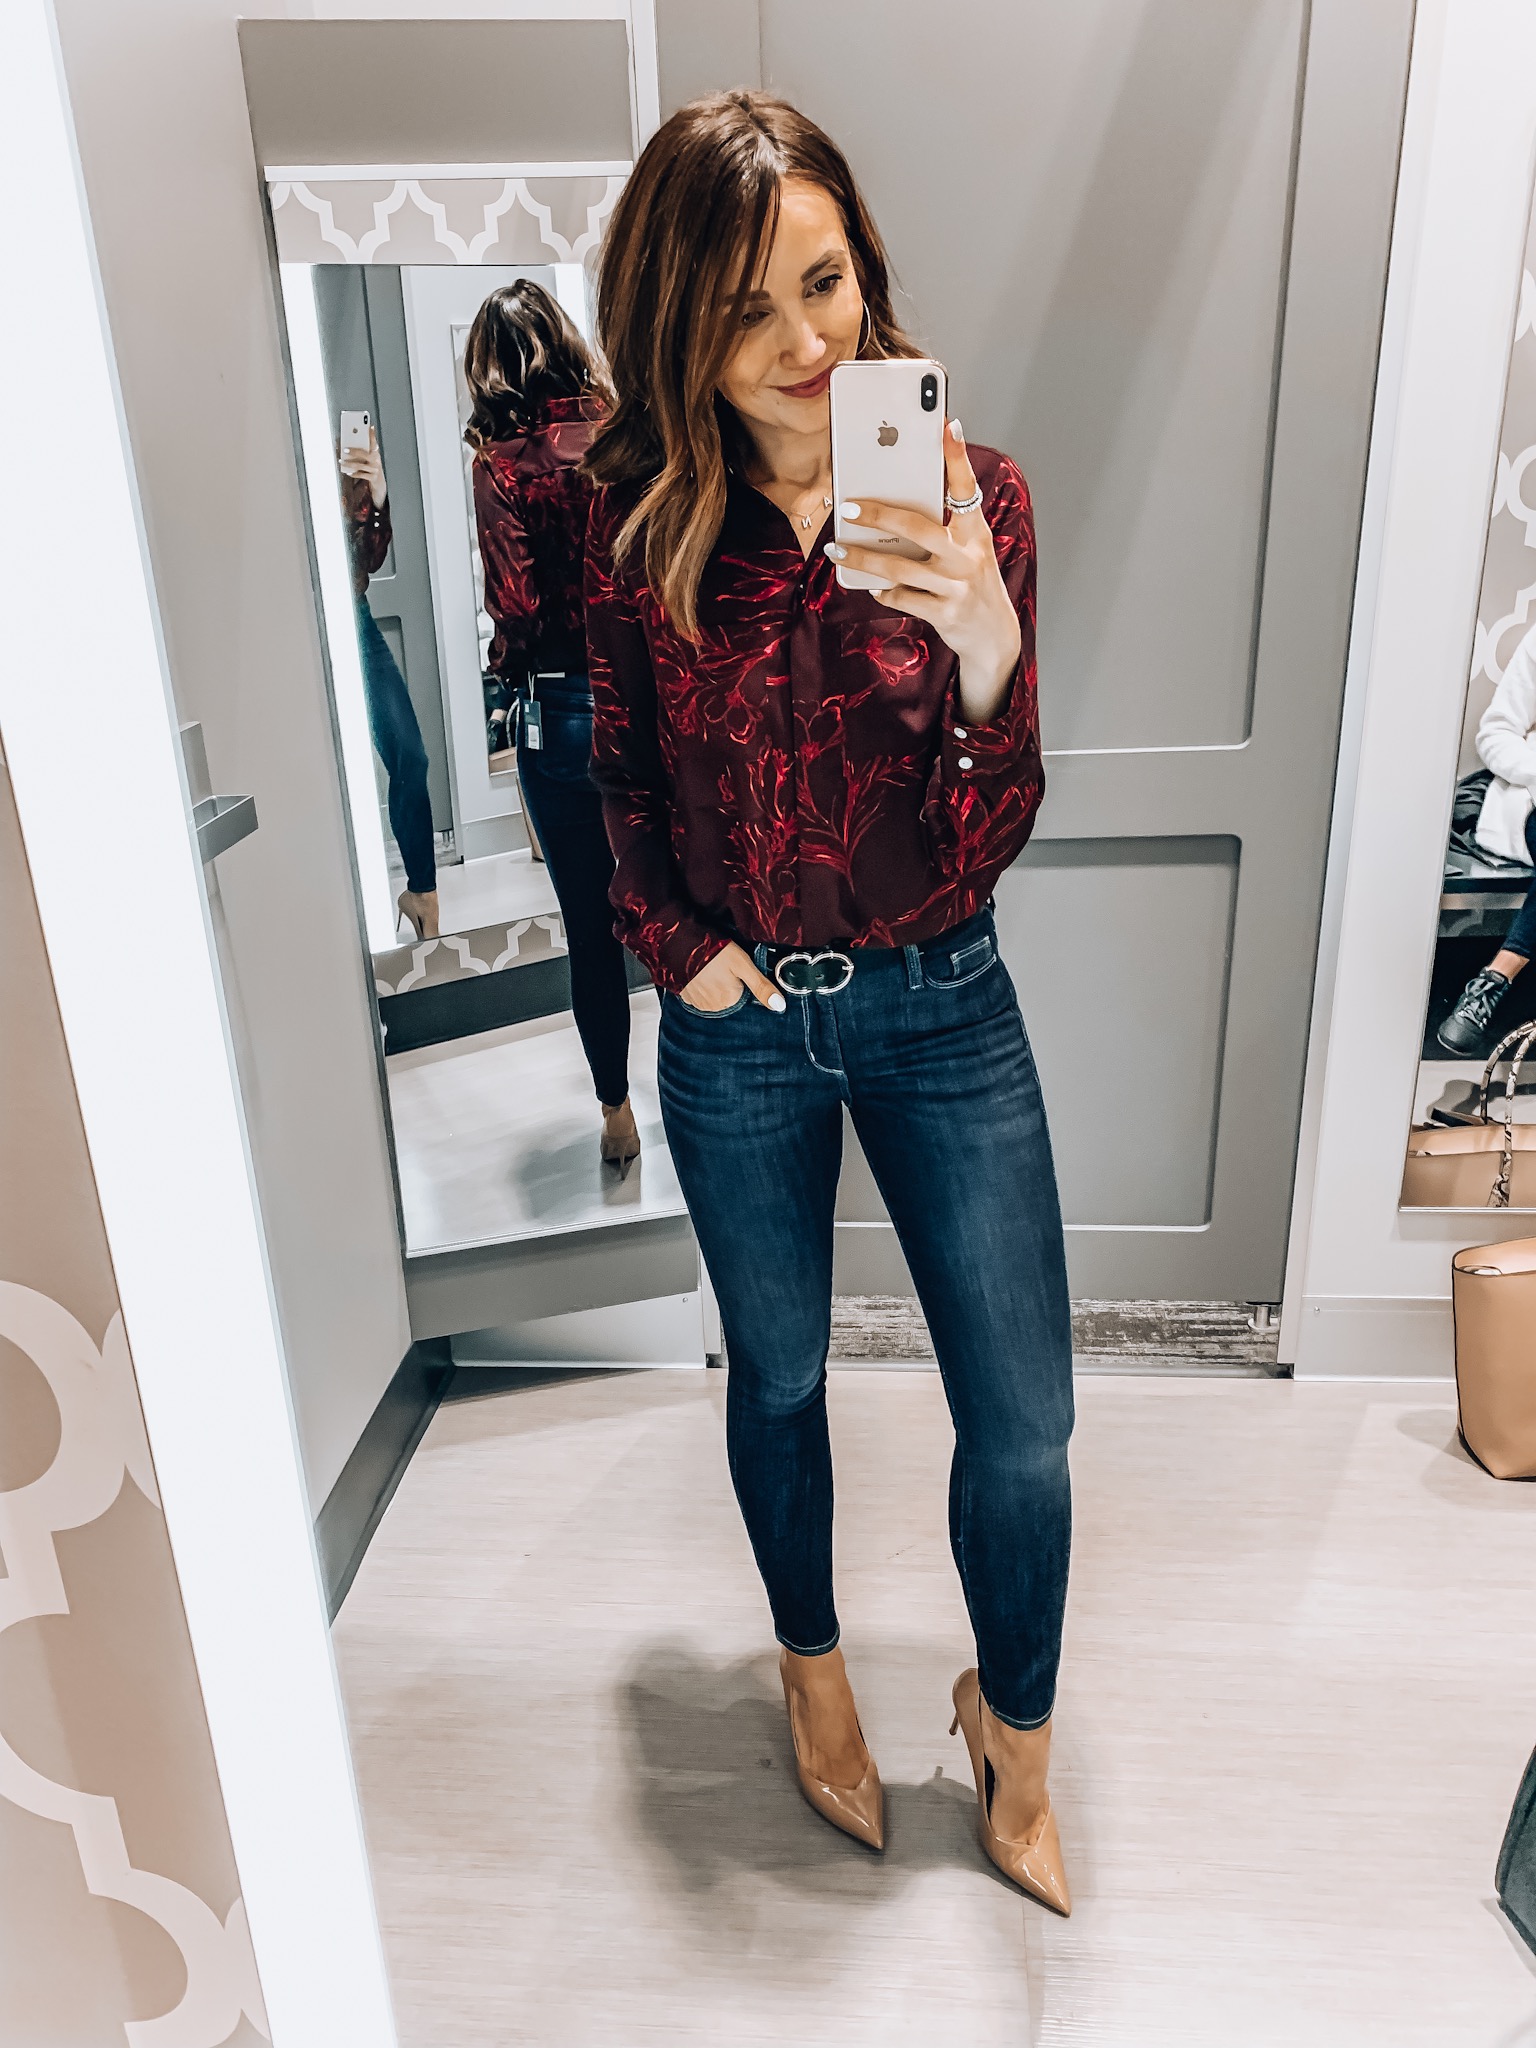 Woman wearing floral blouse and jeans, Target style